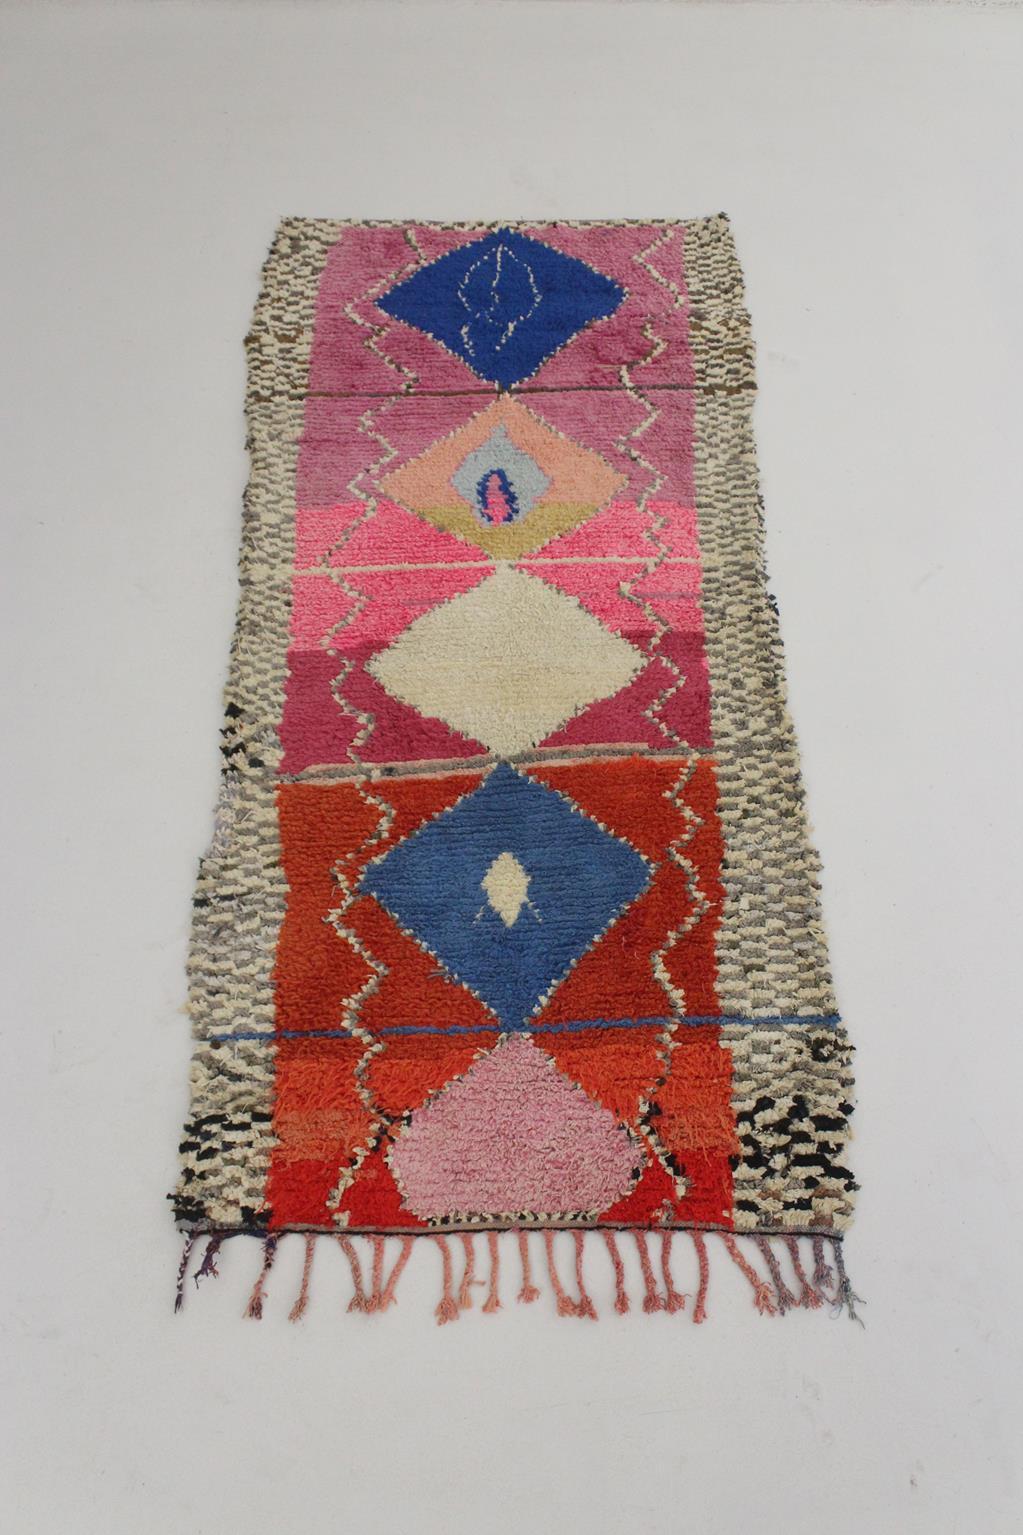 I picked this lovely runner rug from stacks of carpets as I think it is such a sweet vintage piece! Main colors are a bright pink, lilac, royal blue, sky blue, white... The composition is the classical serie of diamonds (the traditional berber